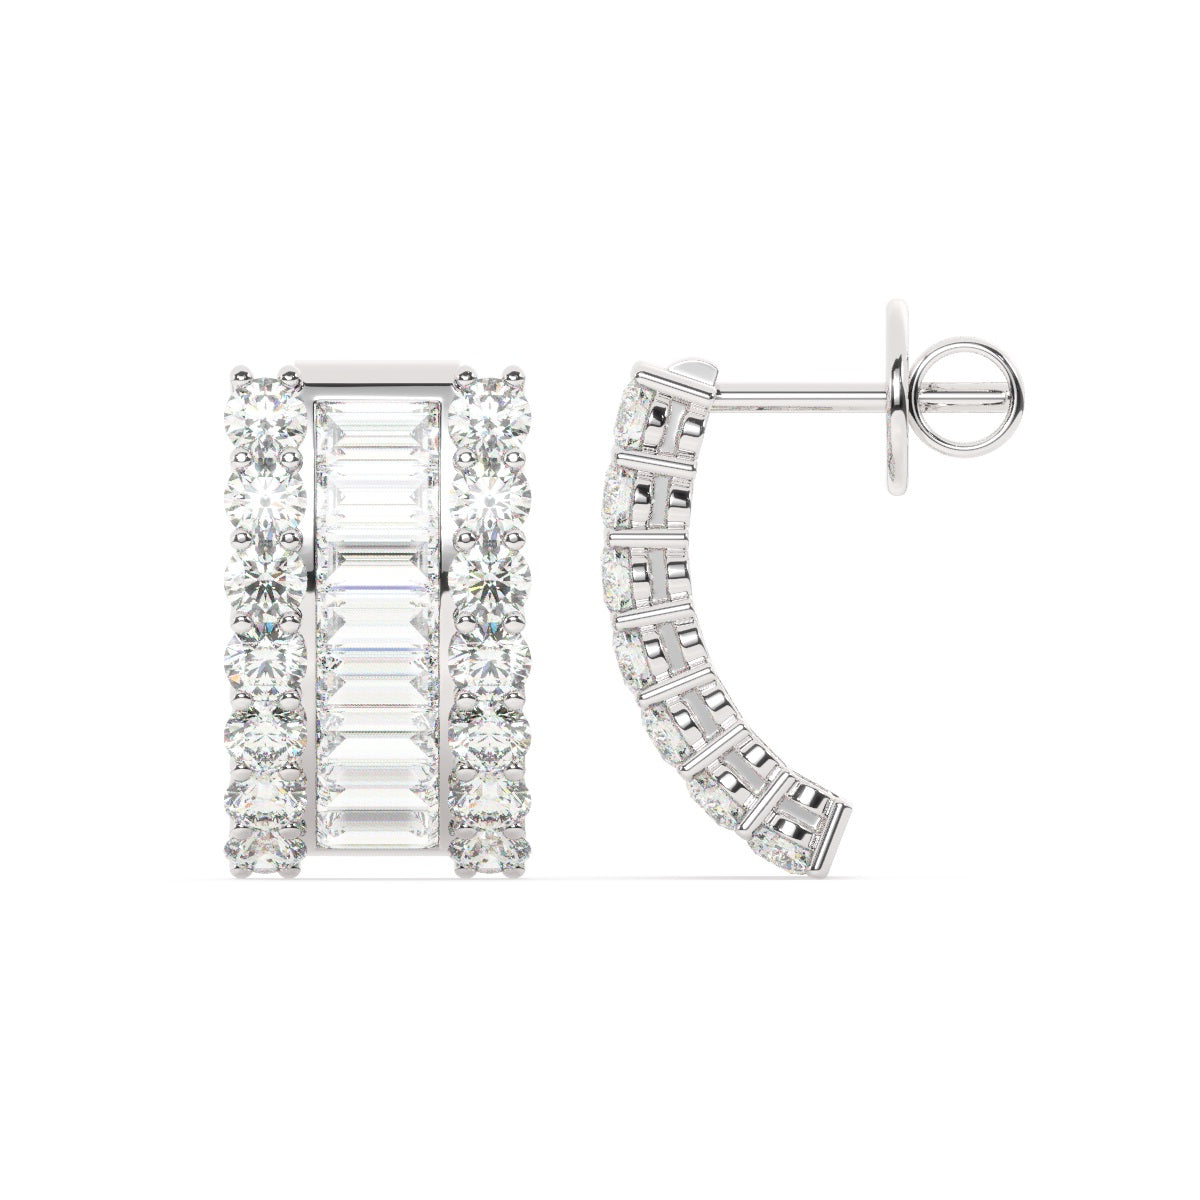 14k White Gold Diamond Round and Baguette Cut Earring 2.58c